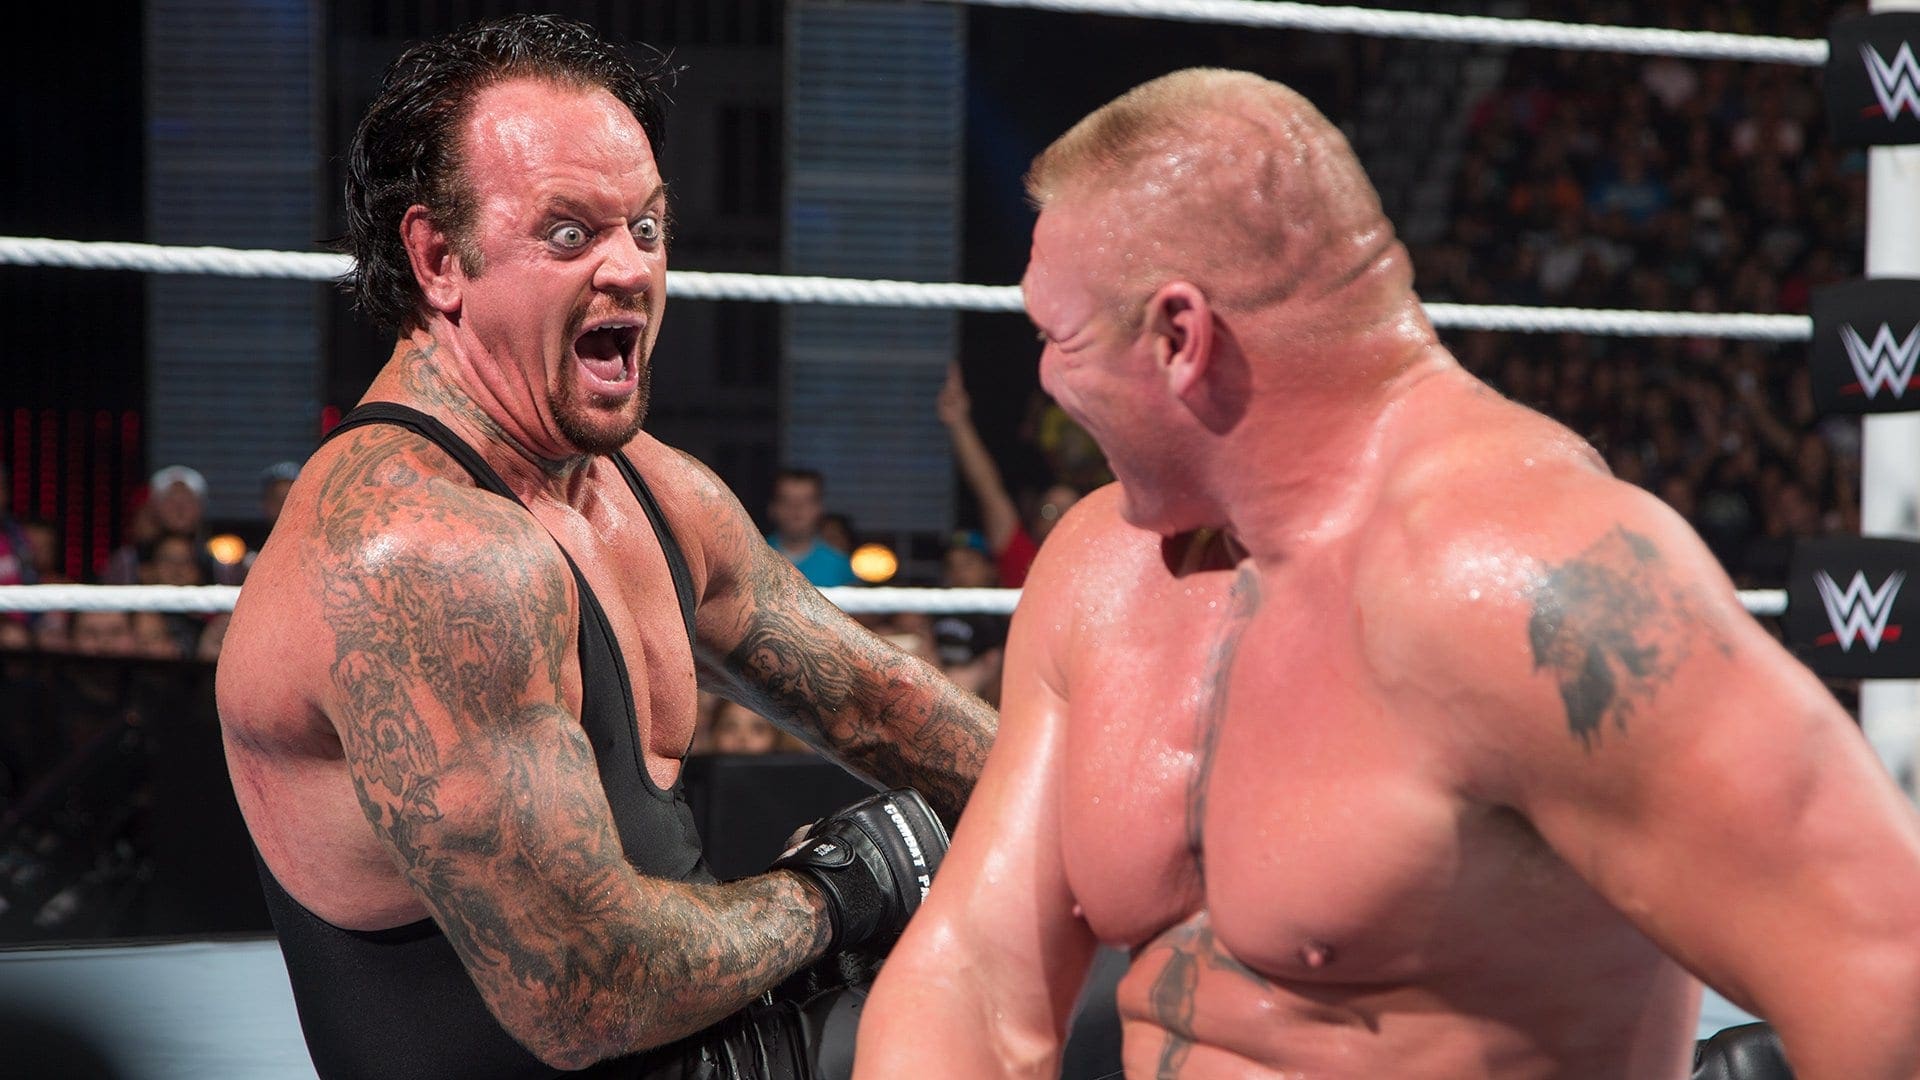 Why WWE Changed Plans For The Undertaker vs Brock Lesnar